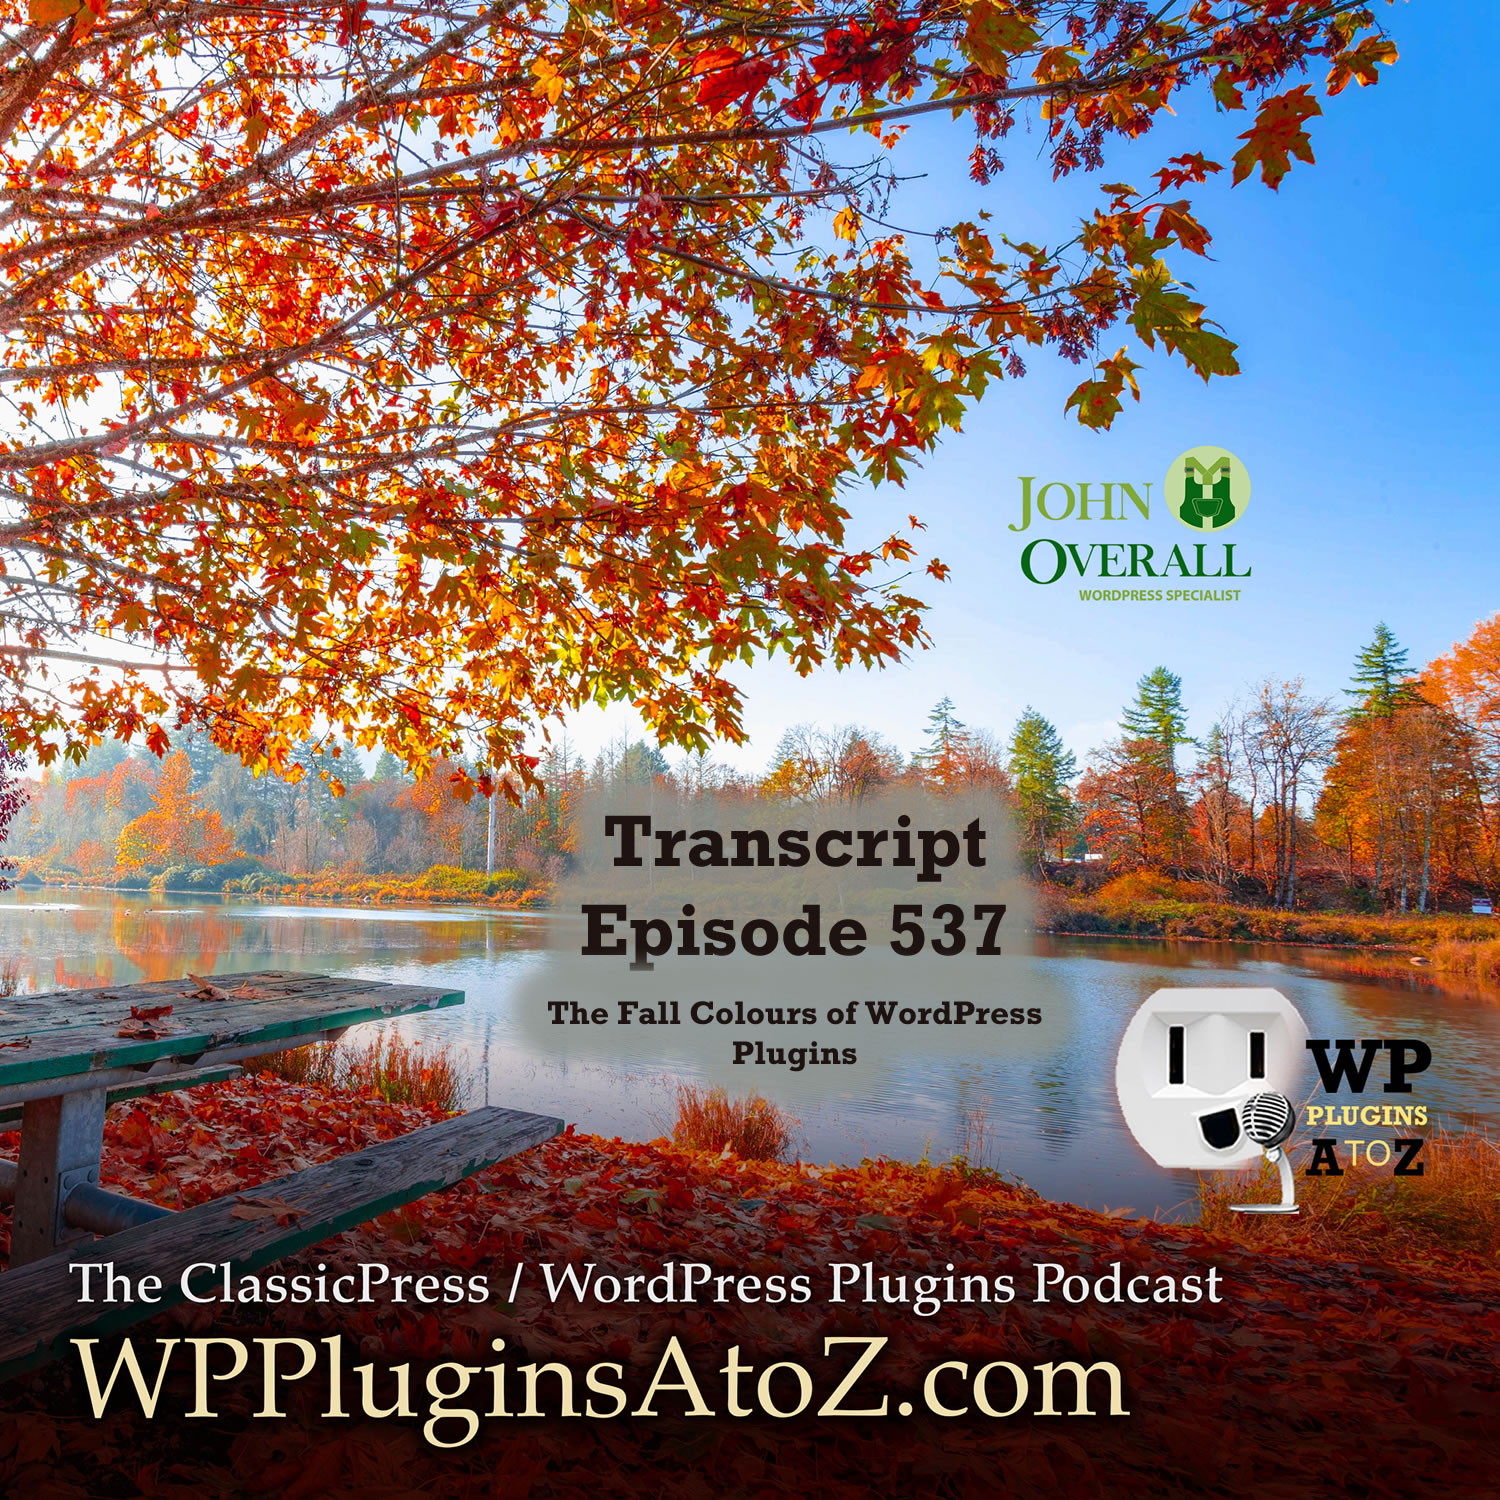 Transcript for Episode 537 Form Sliders, Multi-Vender WooCommerce, Deliveries, Social Sharing in a Snap, Media Auto-up, Socially Auto Posting... and ClassicPress Options. It's all coming up on WordPress Plugins A-Z!